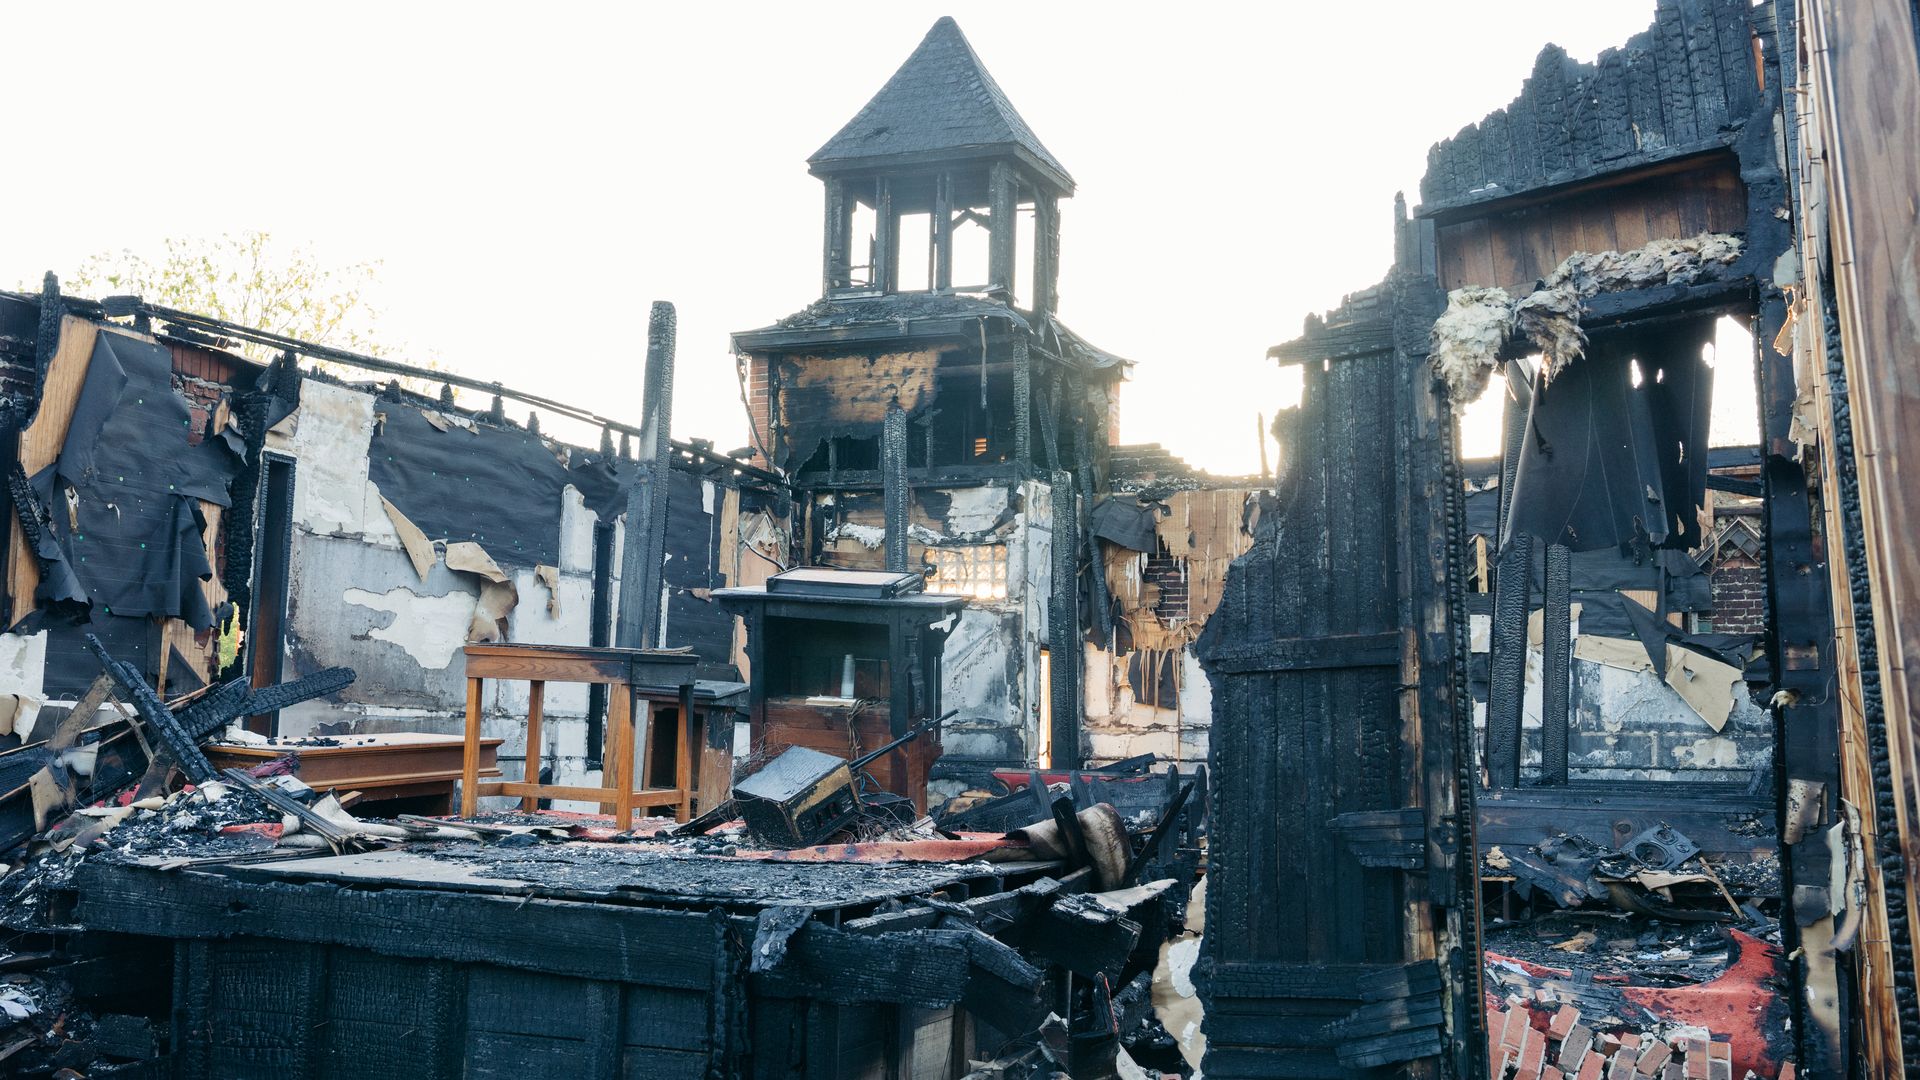 Church after a fire in St. Landry, Louisiana 